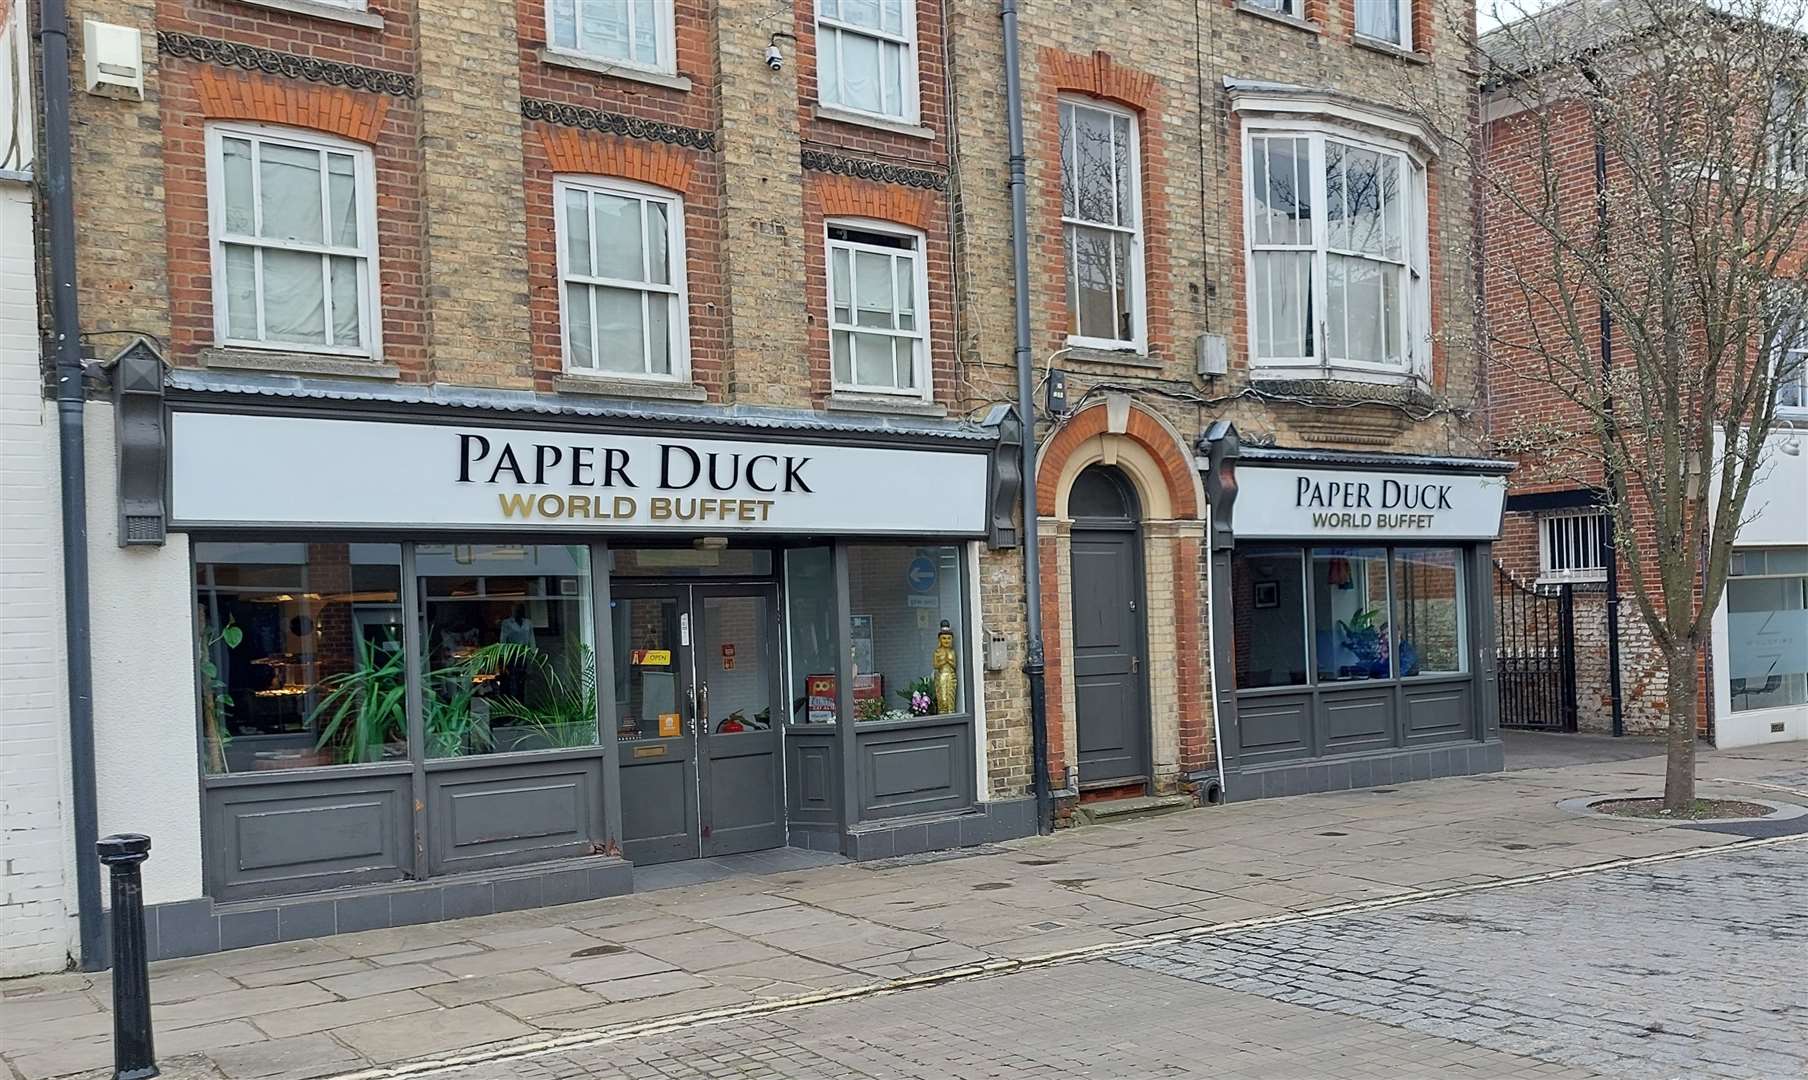 Alun Yeung from the Paper Duck World Buffet objected to the plans